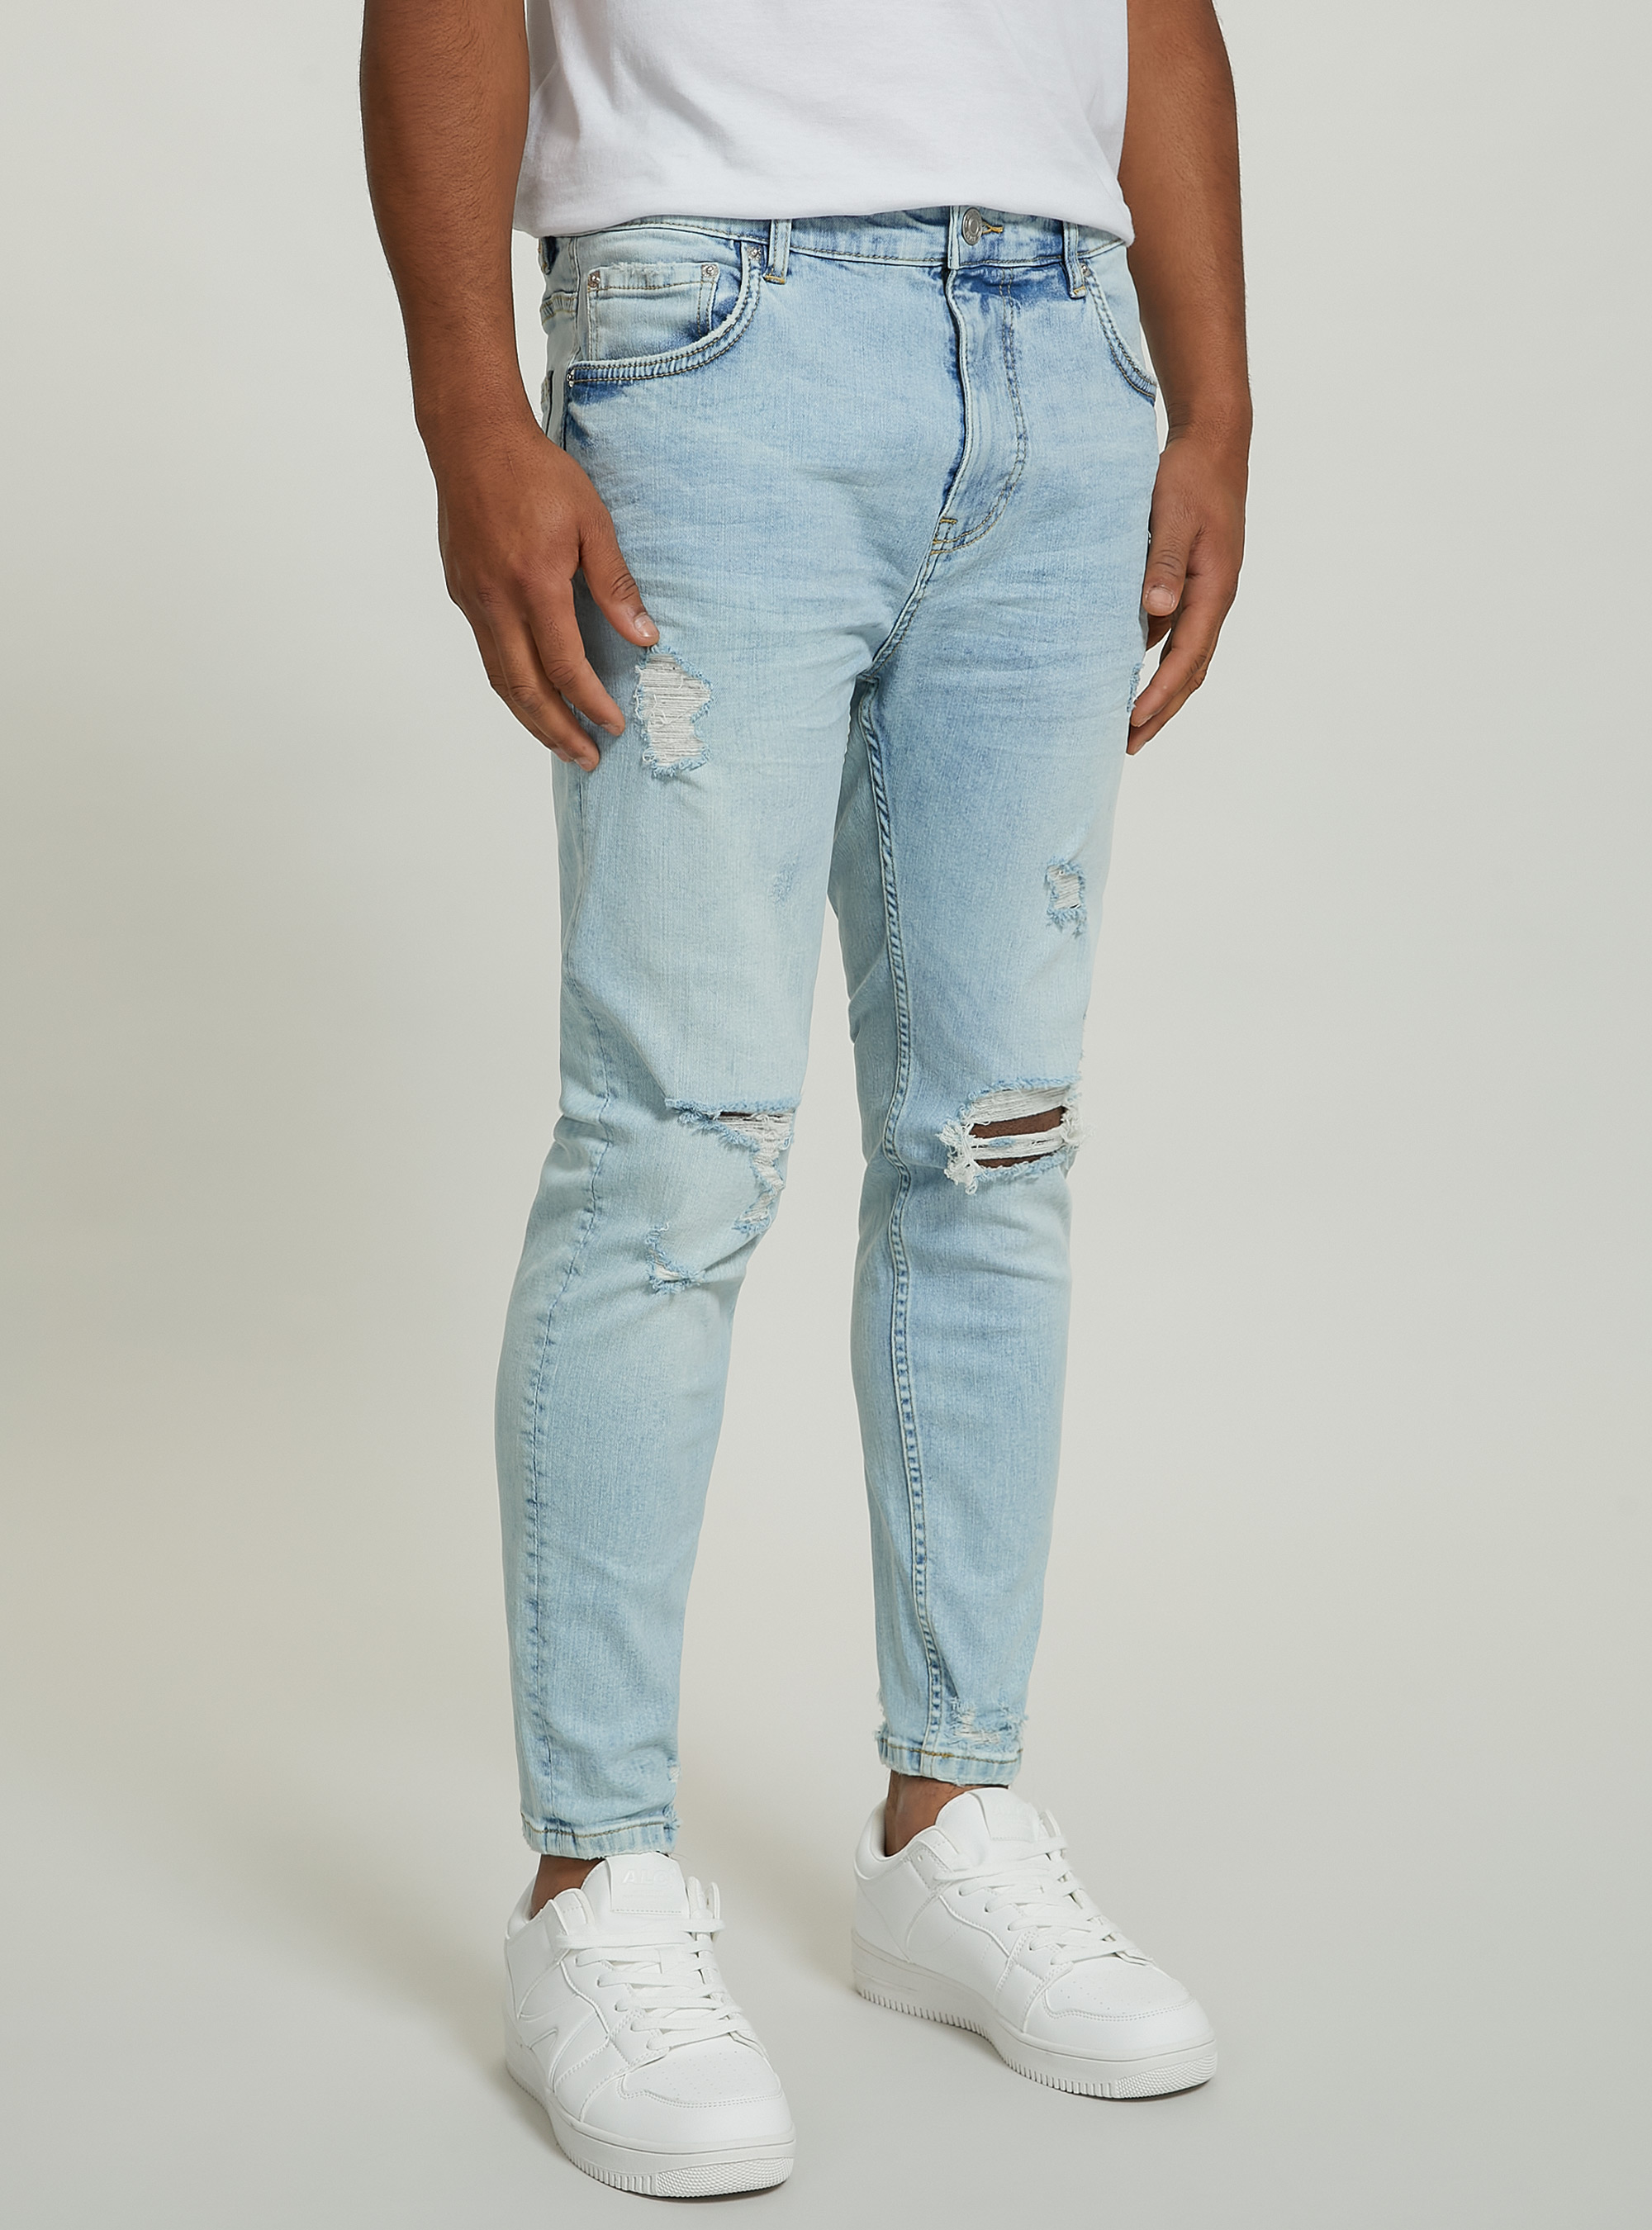 Stretch denim carrot fit jeans with rips